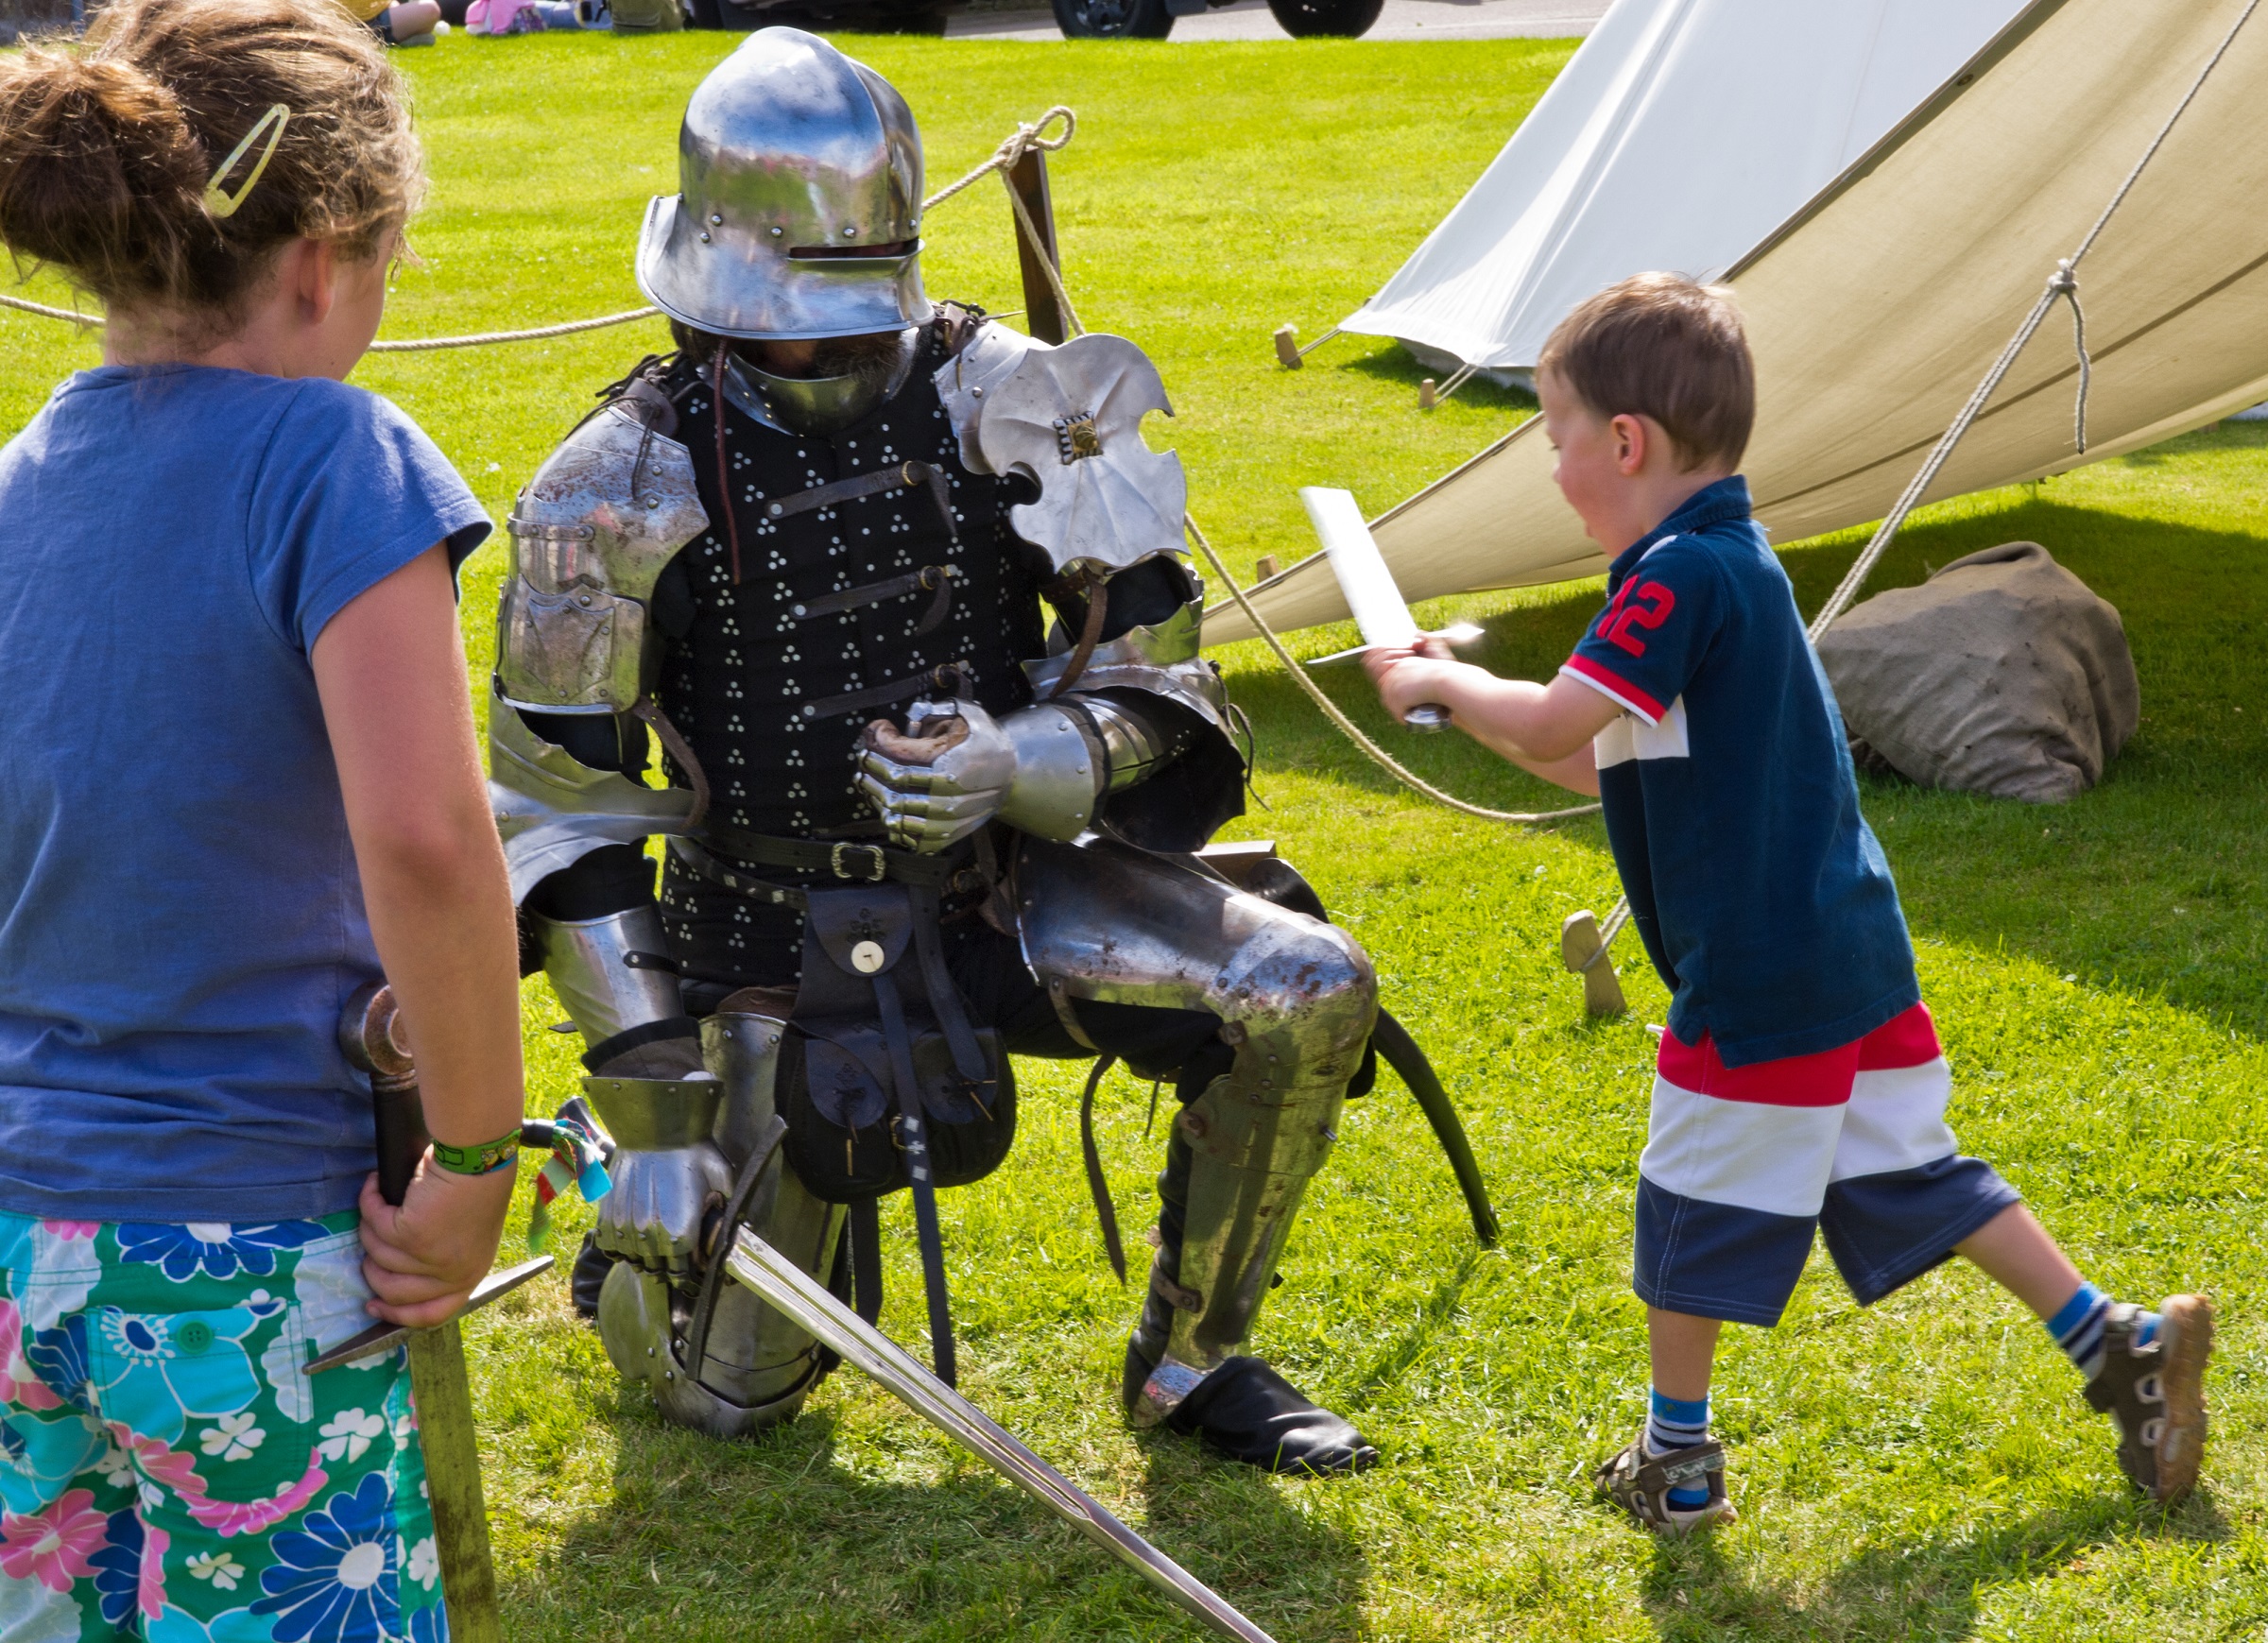 A person dressed in re-enactment clothes as a knight kneeling next to a child swinging a sword